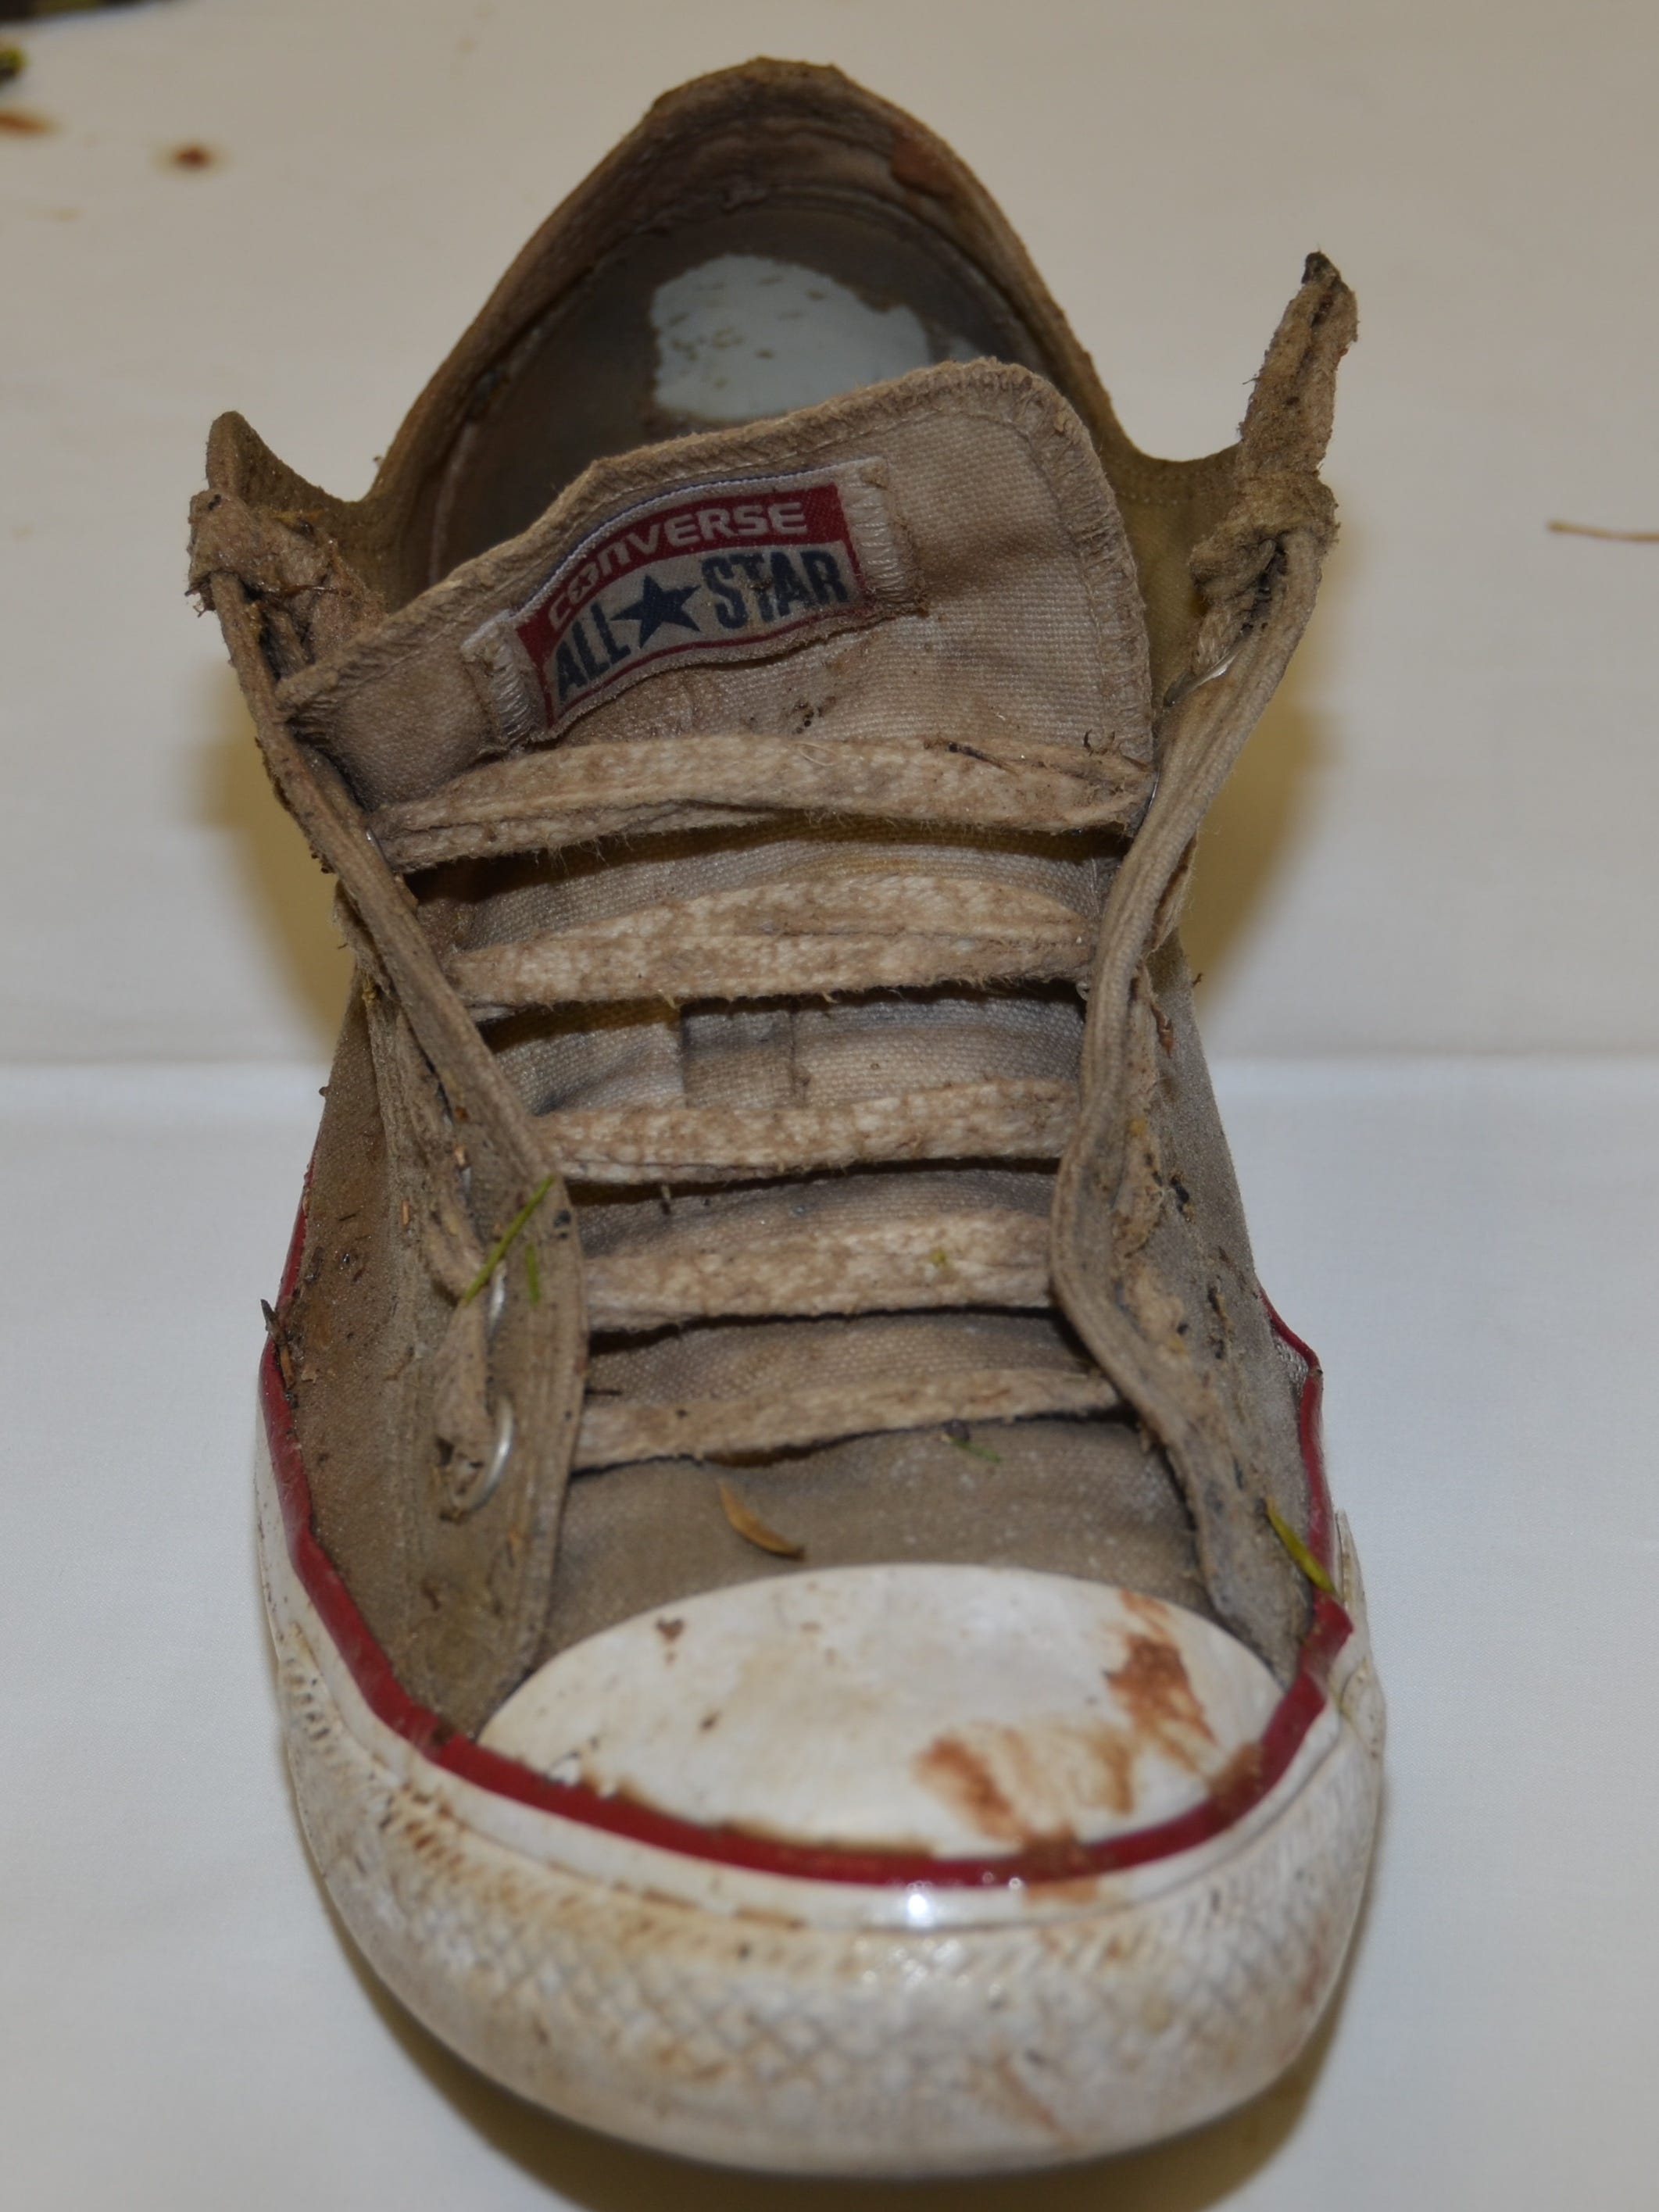 A shoe found with the body of a Latino man located in the All-American Canal on July 28, 2015. Photo from John Doe Case #15-130.